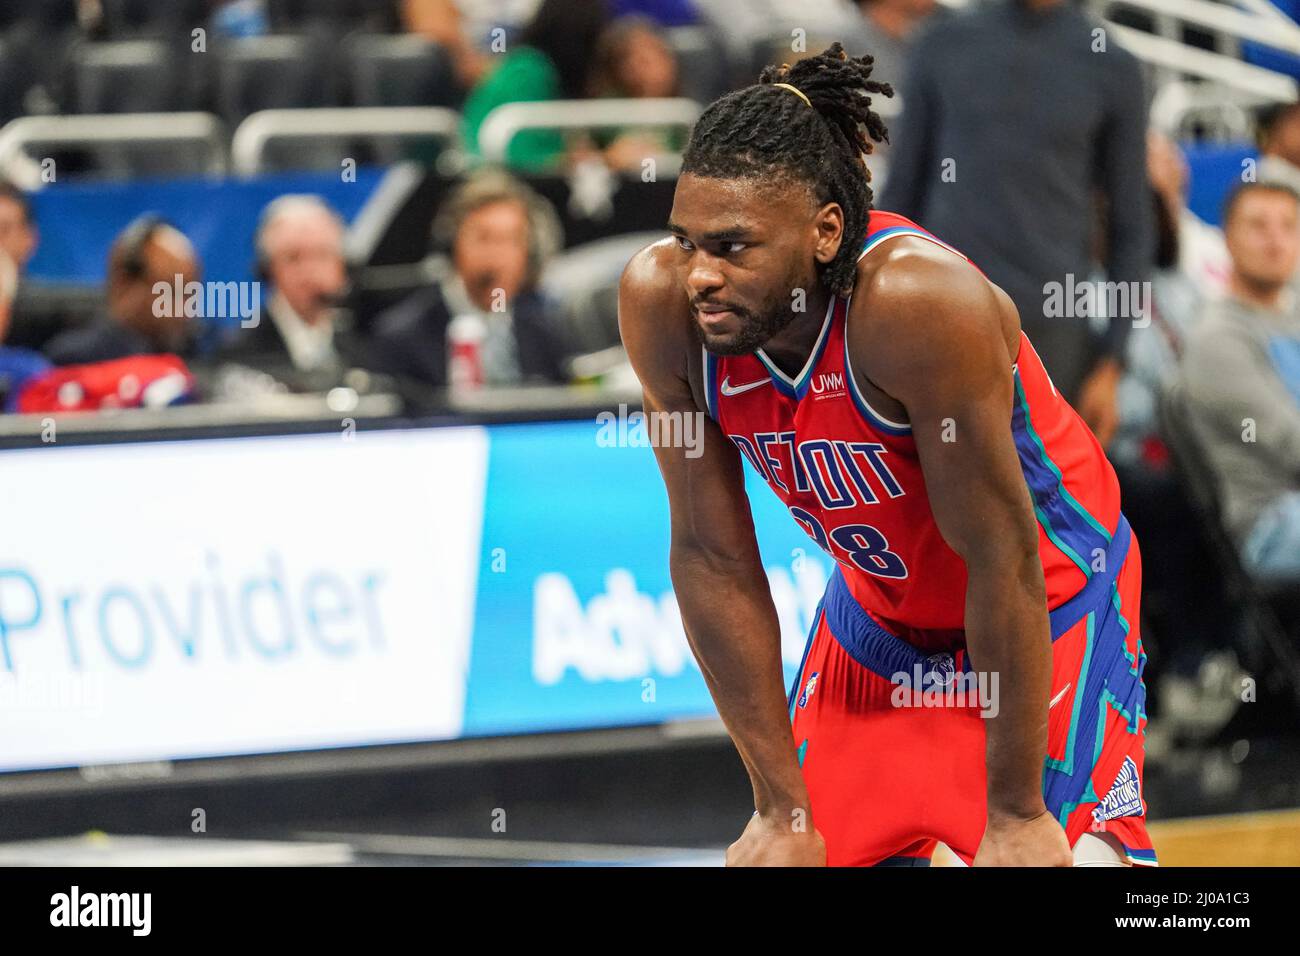 Orlando, Florida, USA, March 17, 2022, Detroit Pistons Center Isaiah Stewart #28 at the Amway Center. Credit: Marty Jean-Louis/Alamy Live News Stock Photo